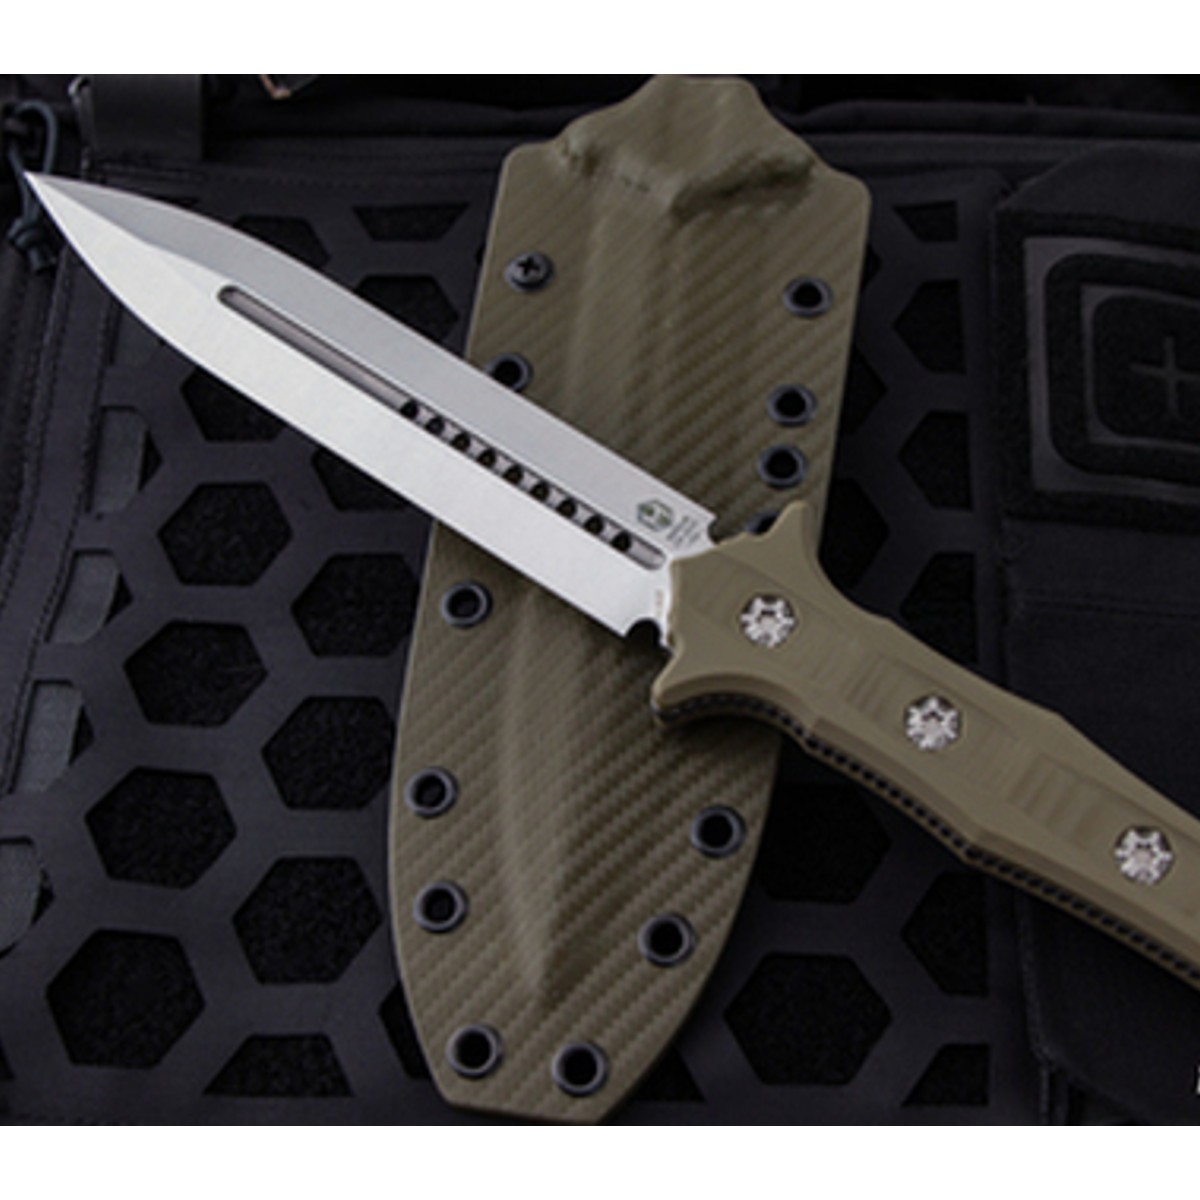 Heretic-Knives-Nephilim-H003-2A-GRN